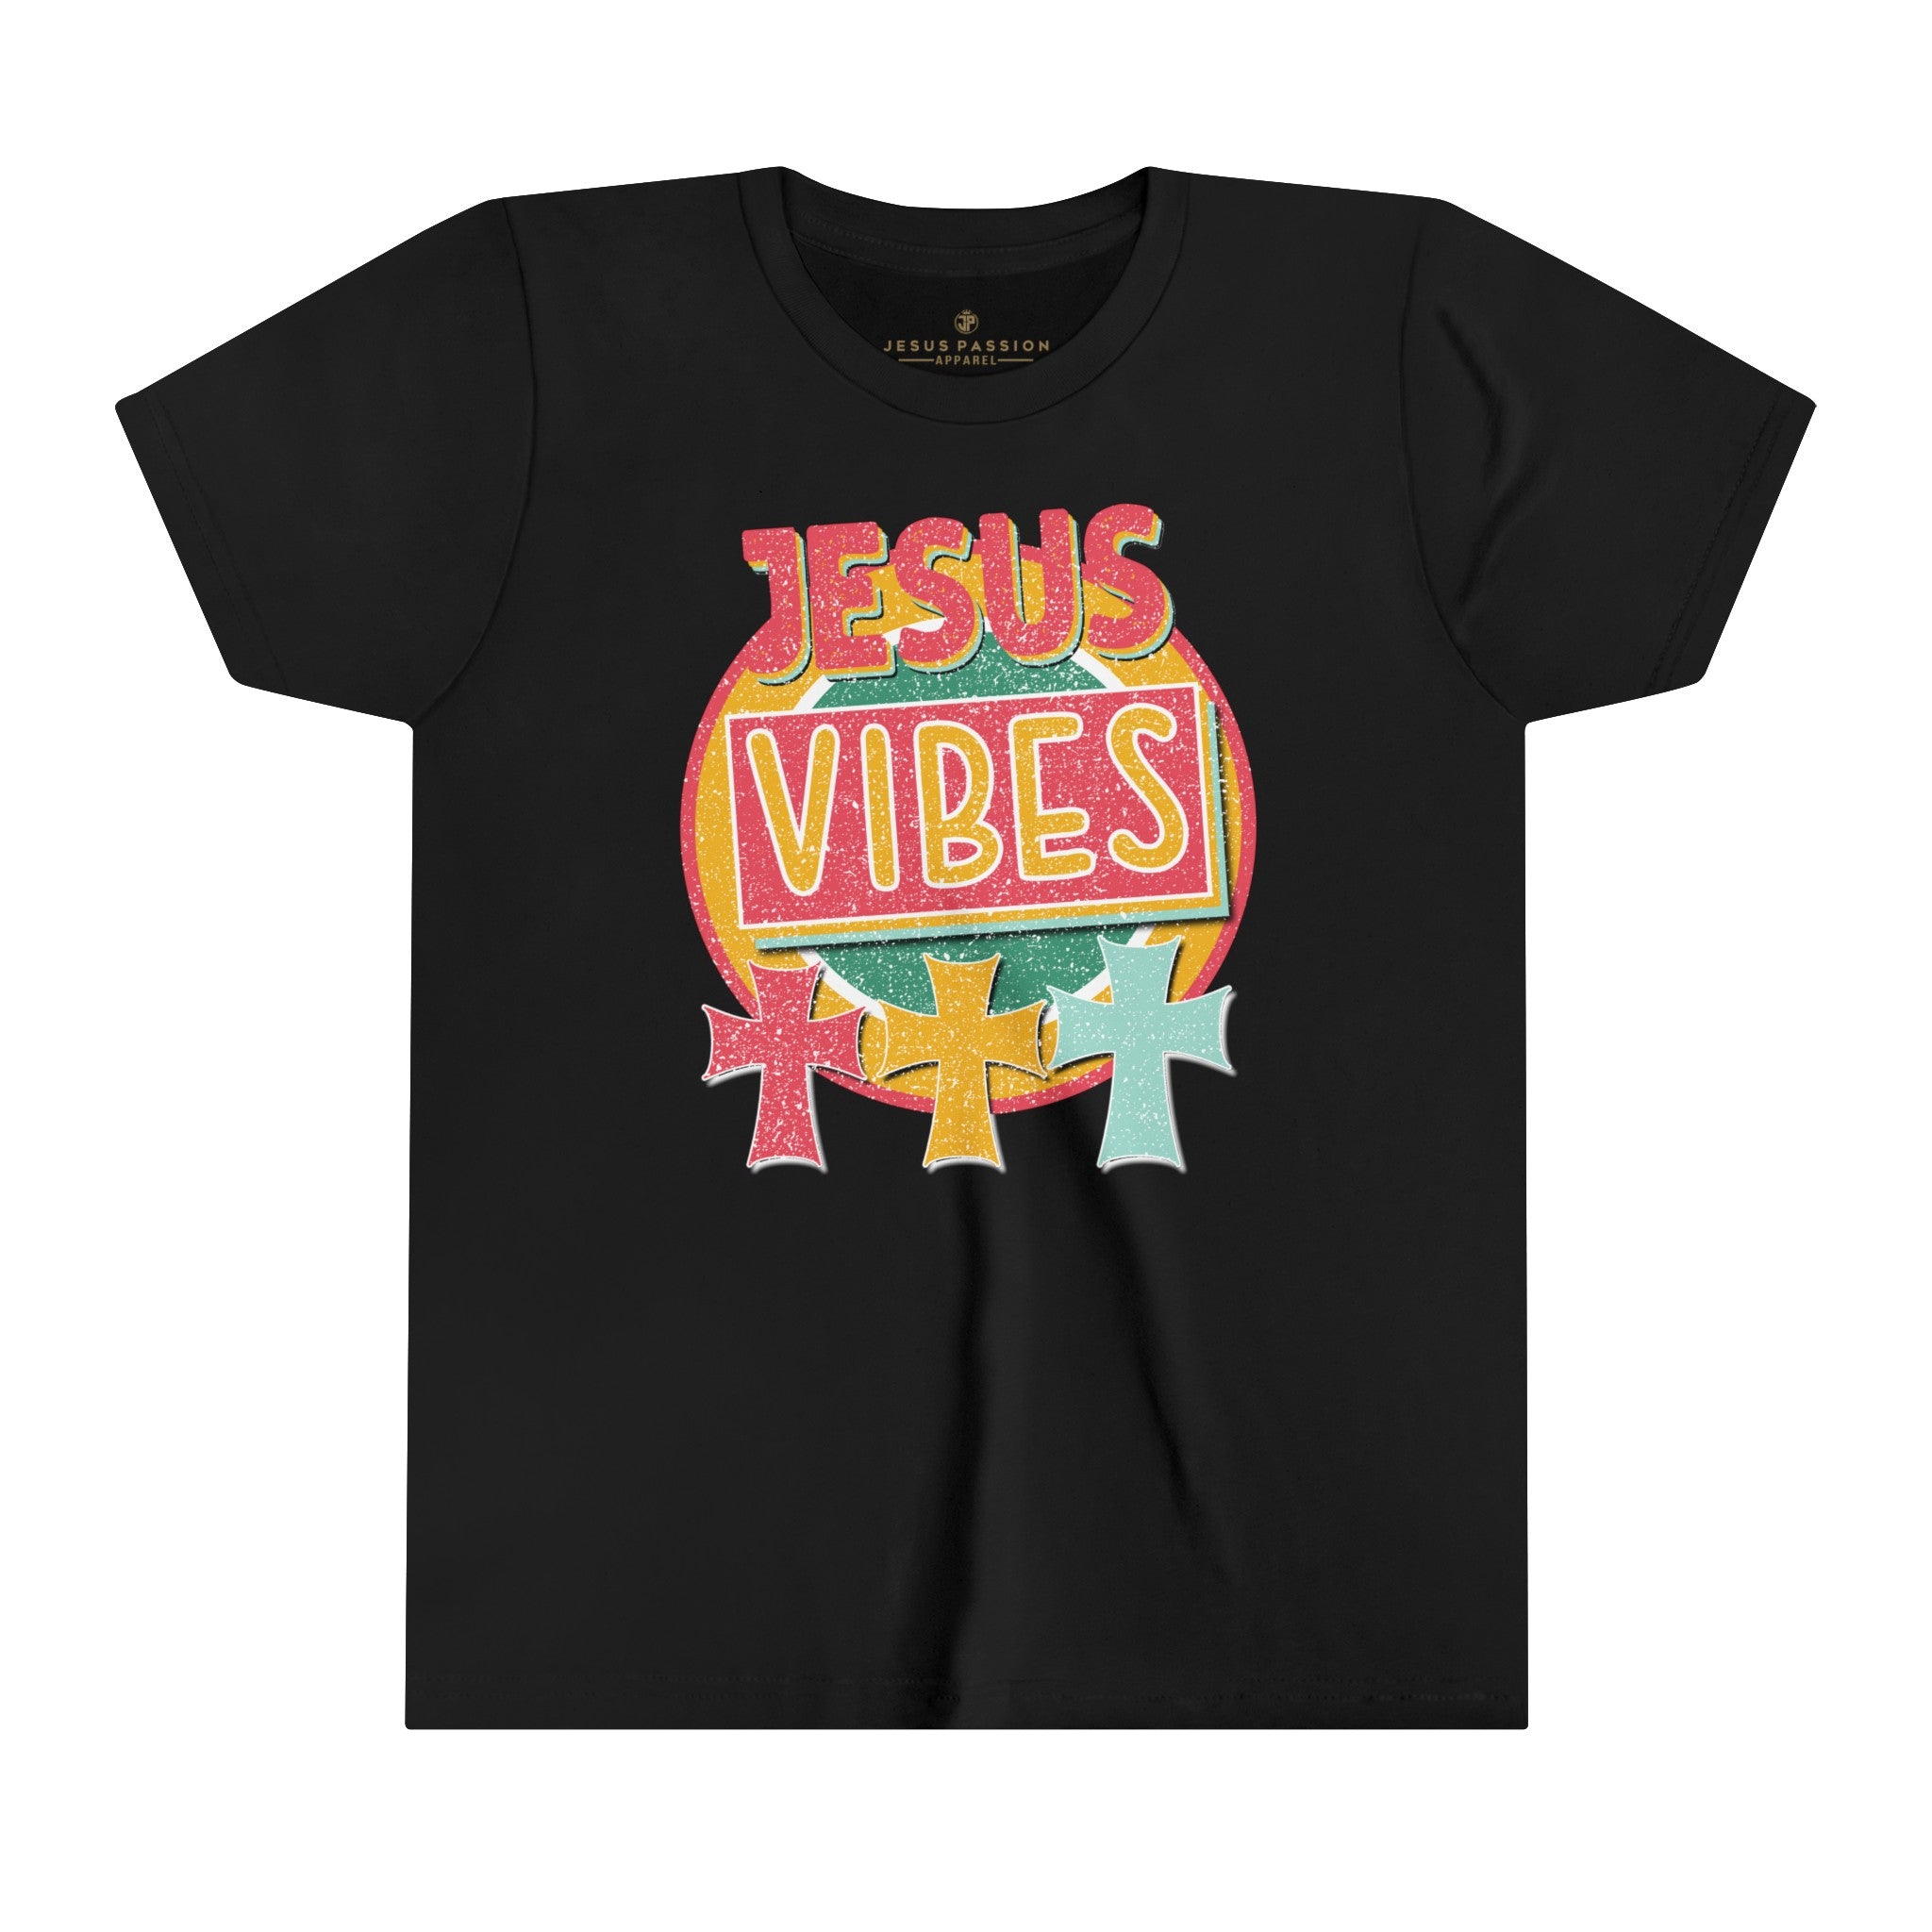 Jesus Vibes Retro-Inspired Youth Relaxed-Fit T-Shirt Colors: Black Sizes: S Jesus Passion Apparel